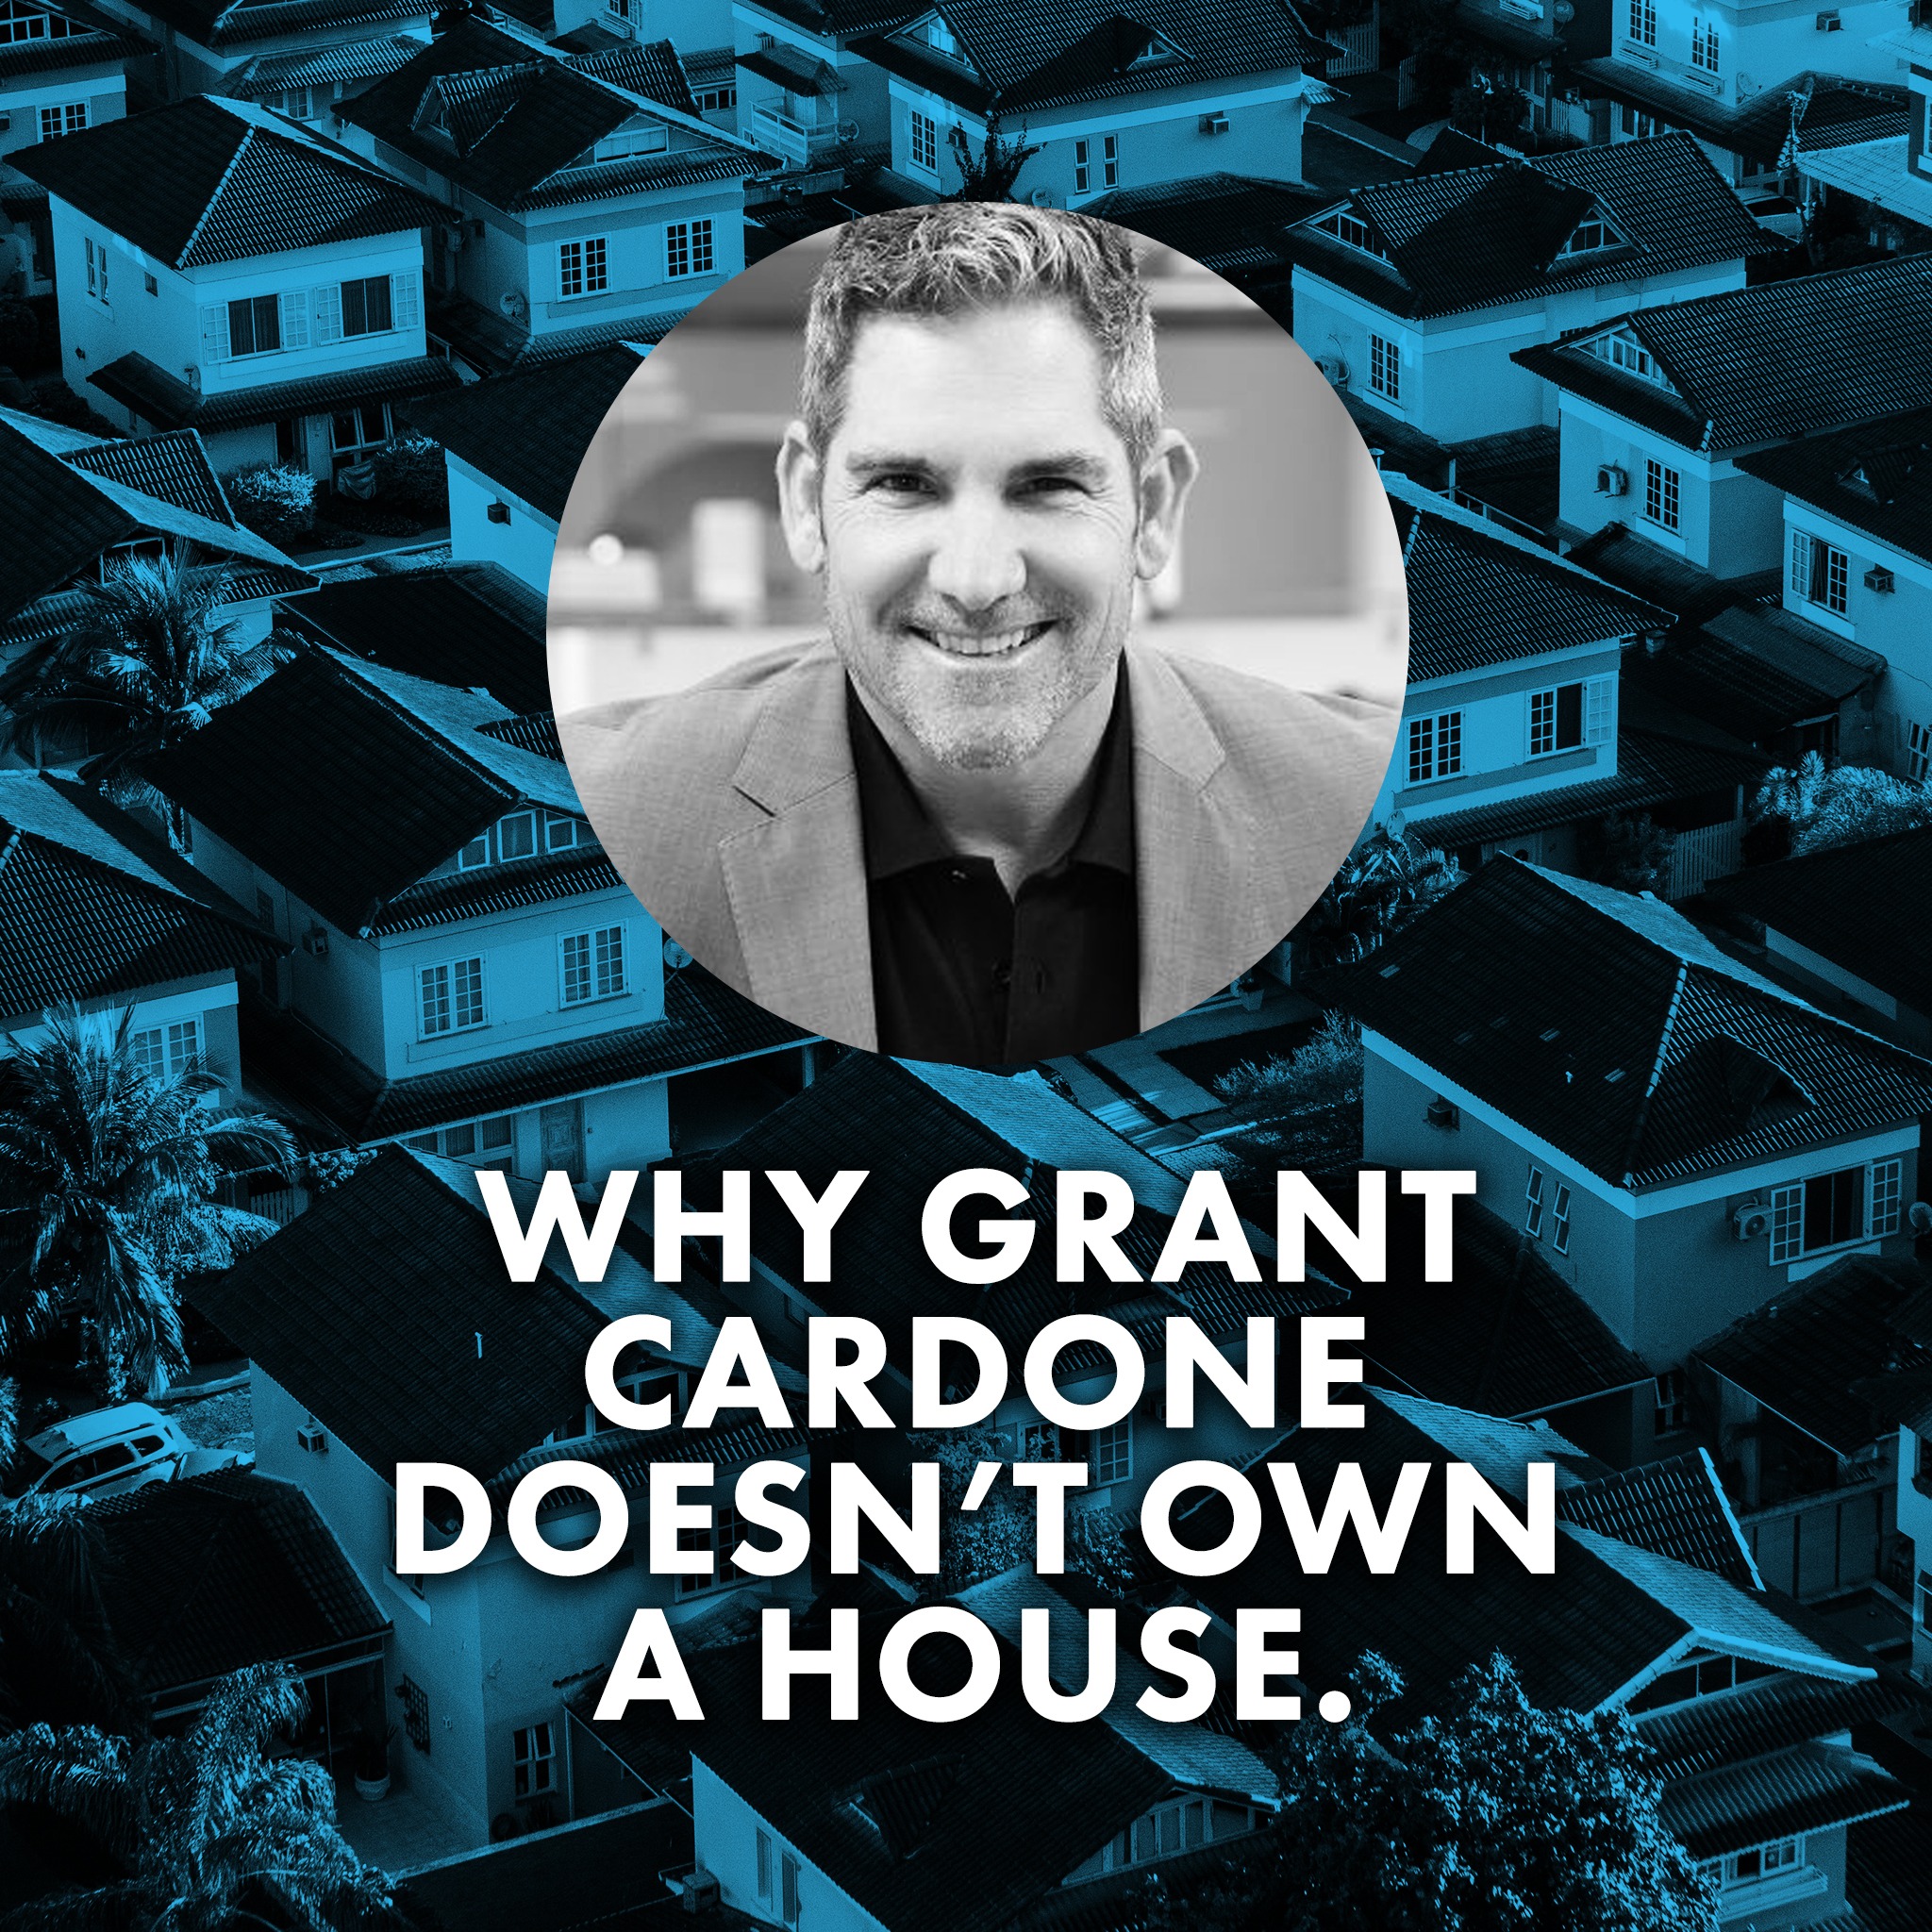 Why Grant Cardone Doesn’t Own a House